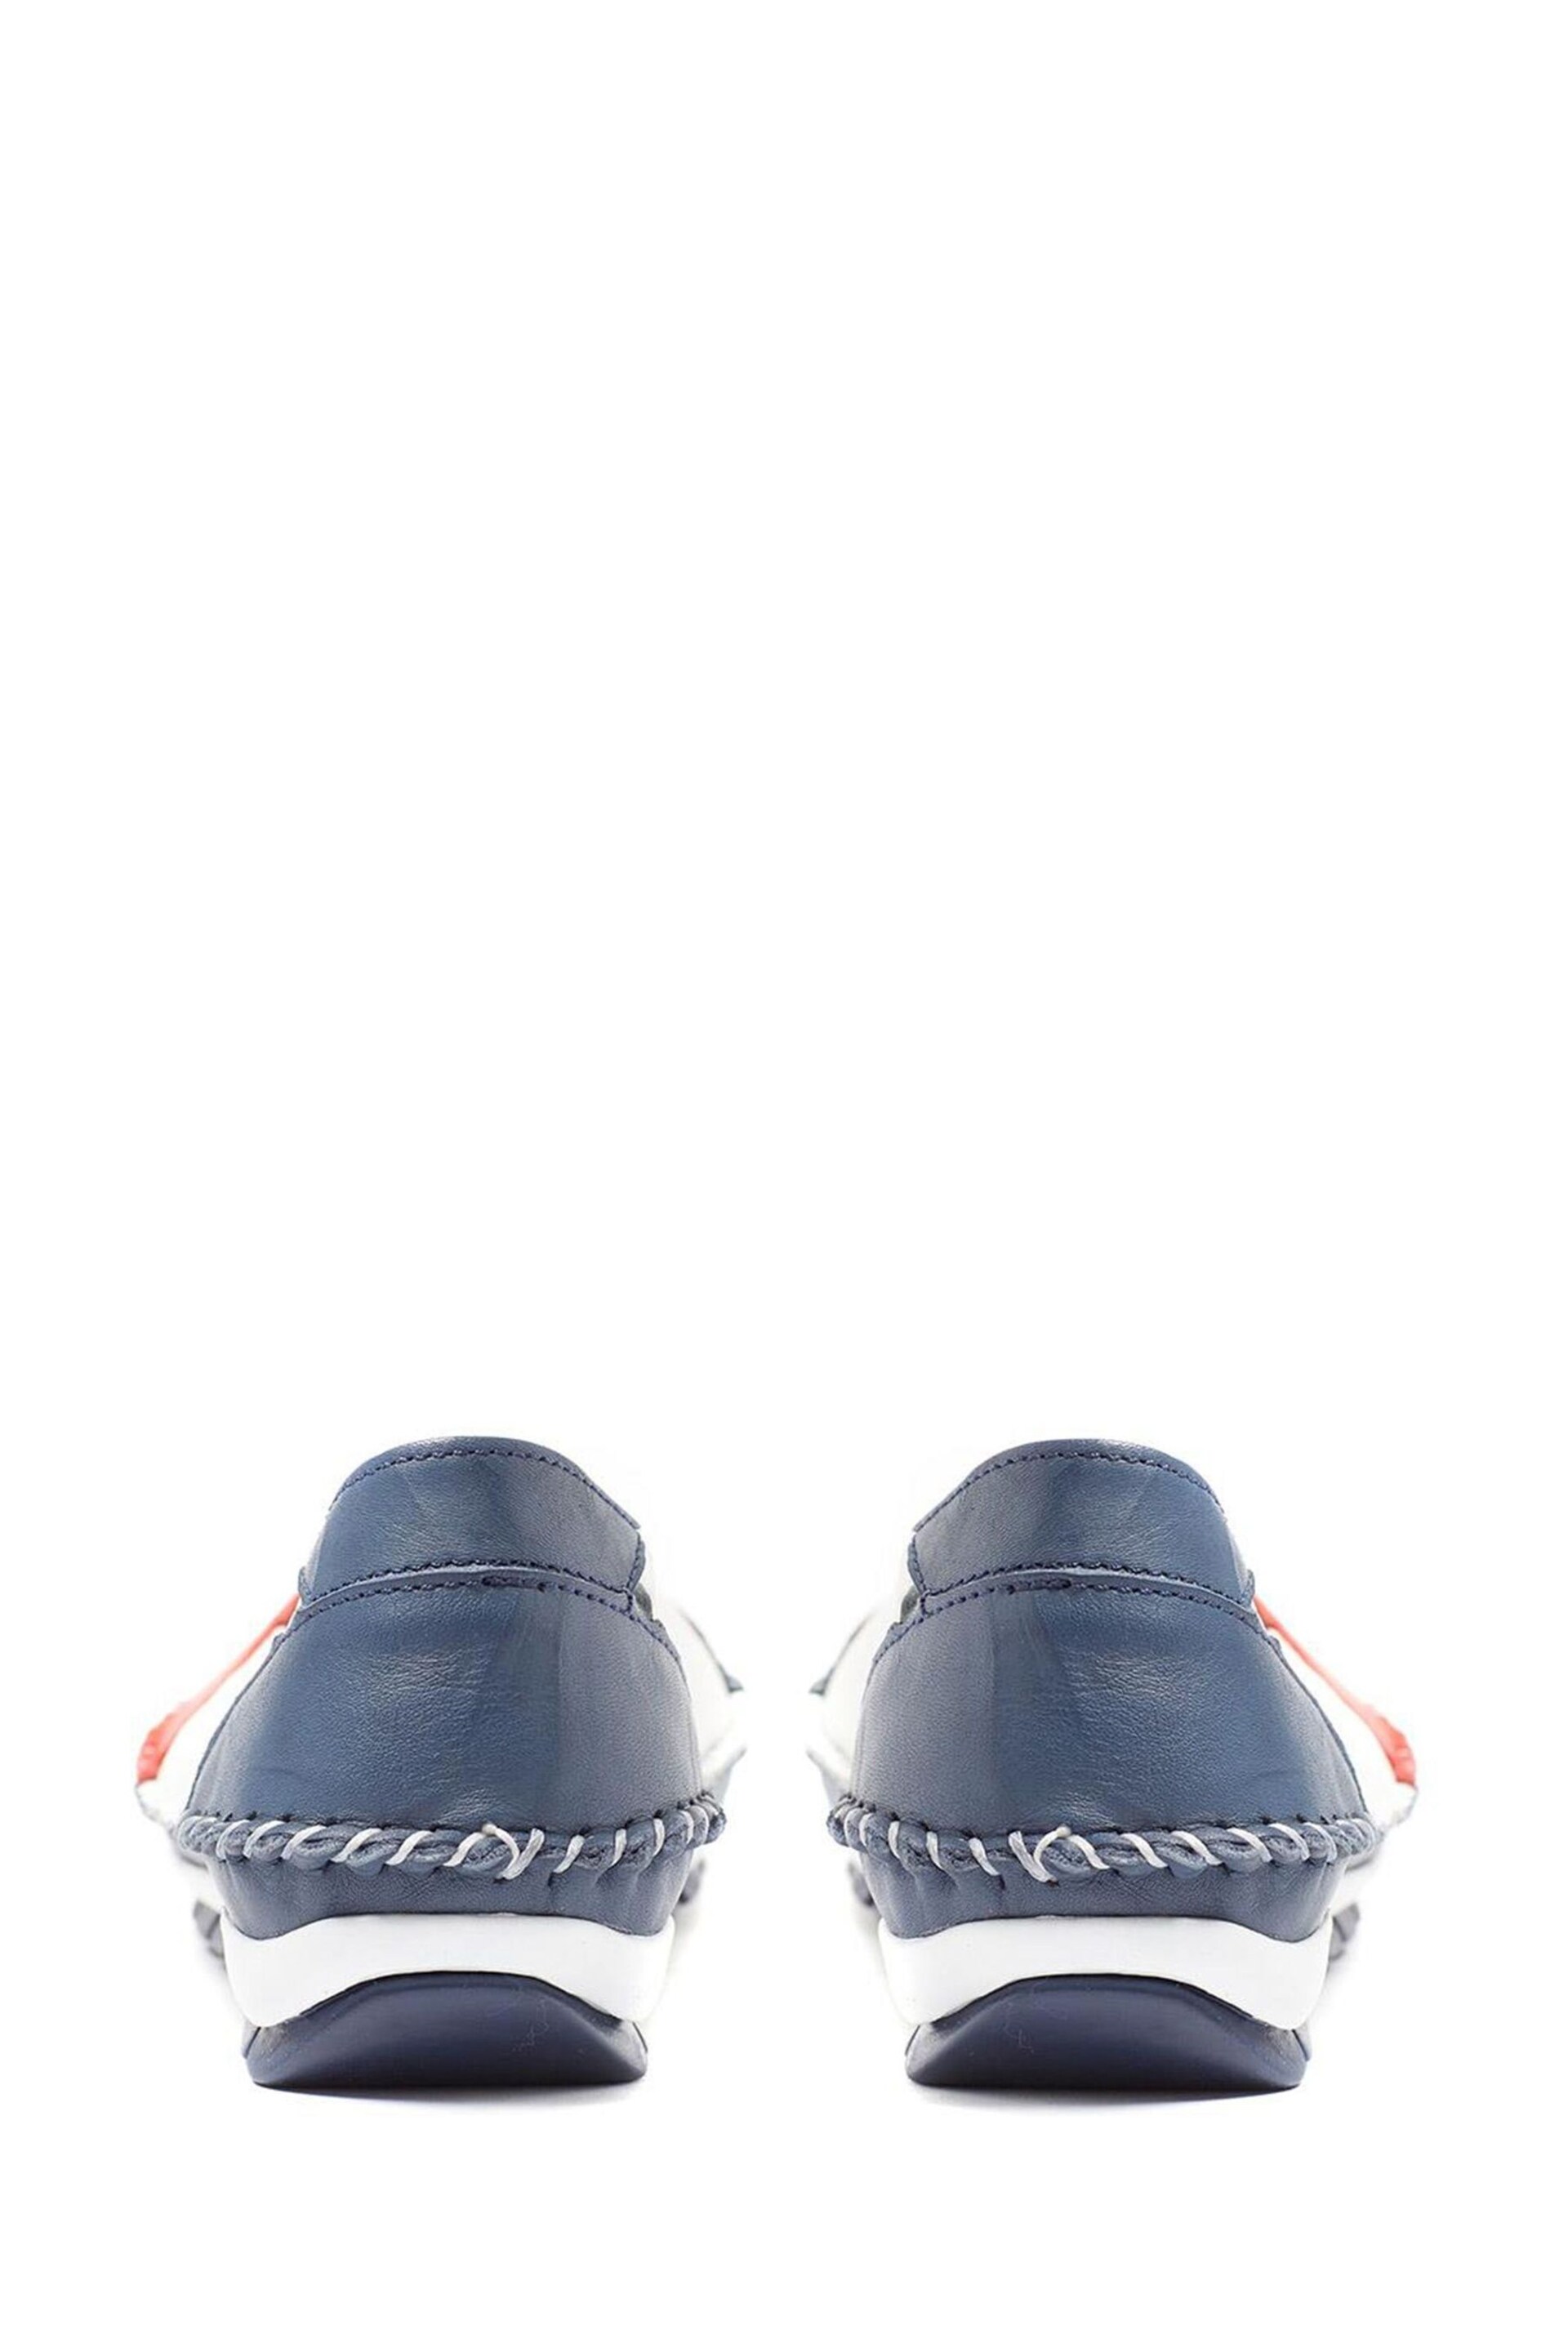 Pavers Blue Leather Slip On Shoes - Image 5 of 5